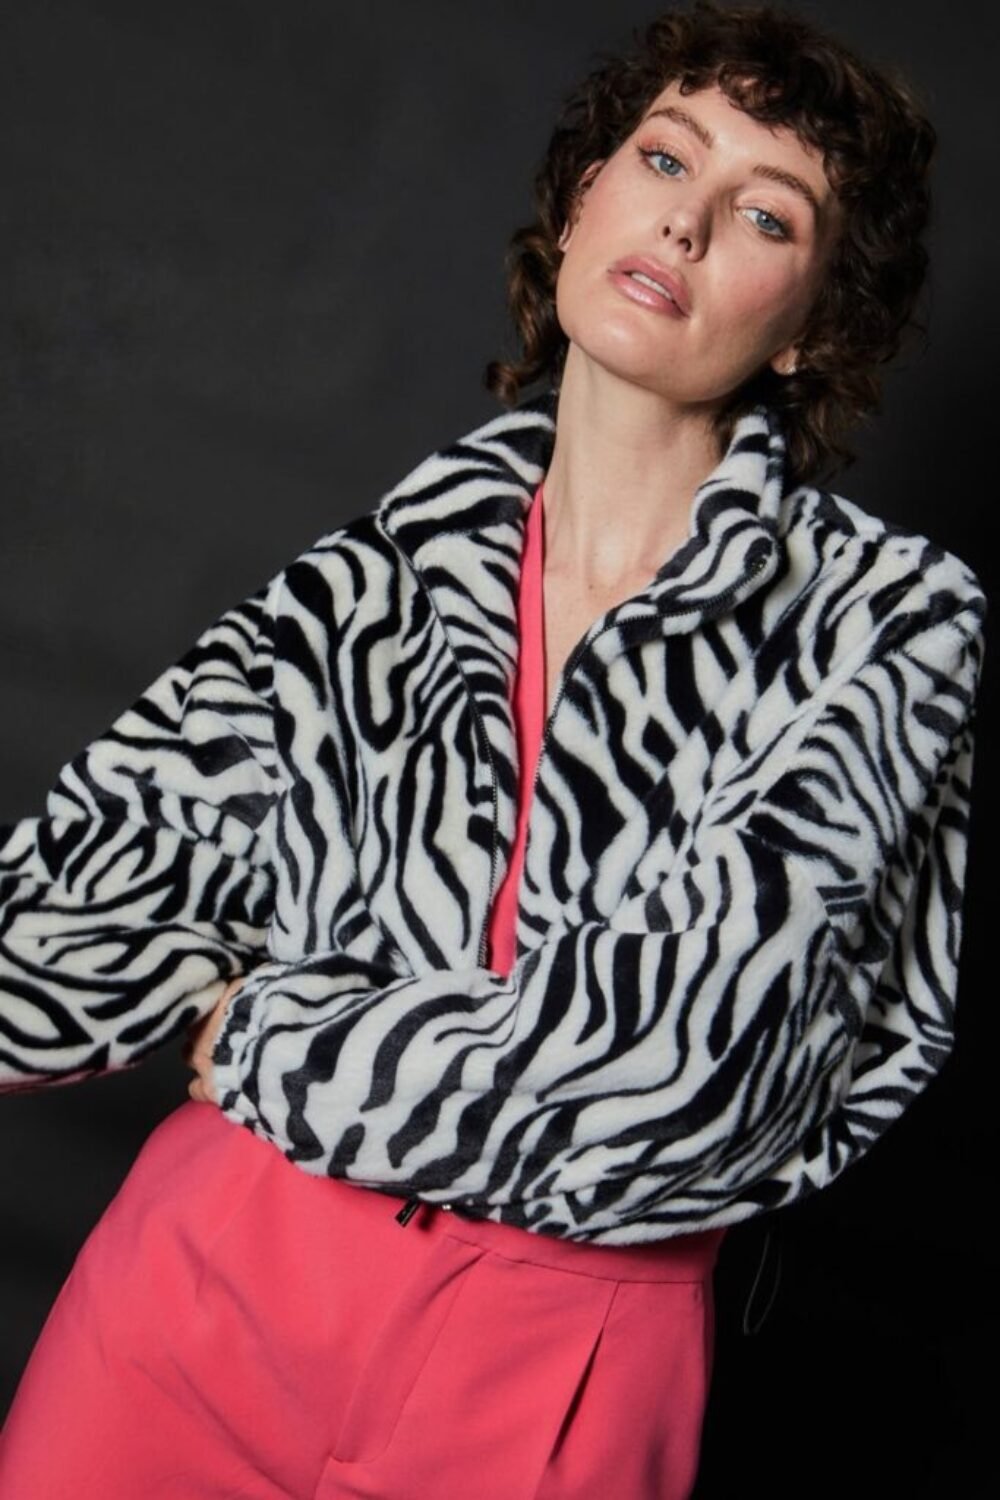 Shop Lux Zebra Print Faux Fur Cropped Bomber Jacket and women's luxury and designer clothes at www.lux-apparel.co.uk